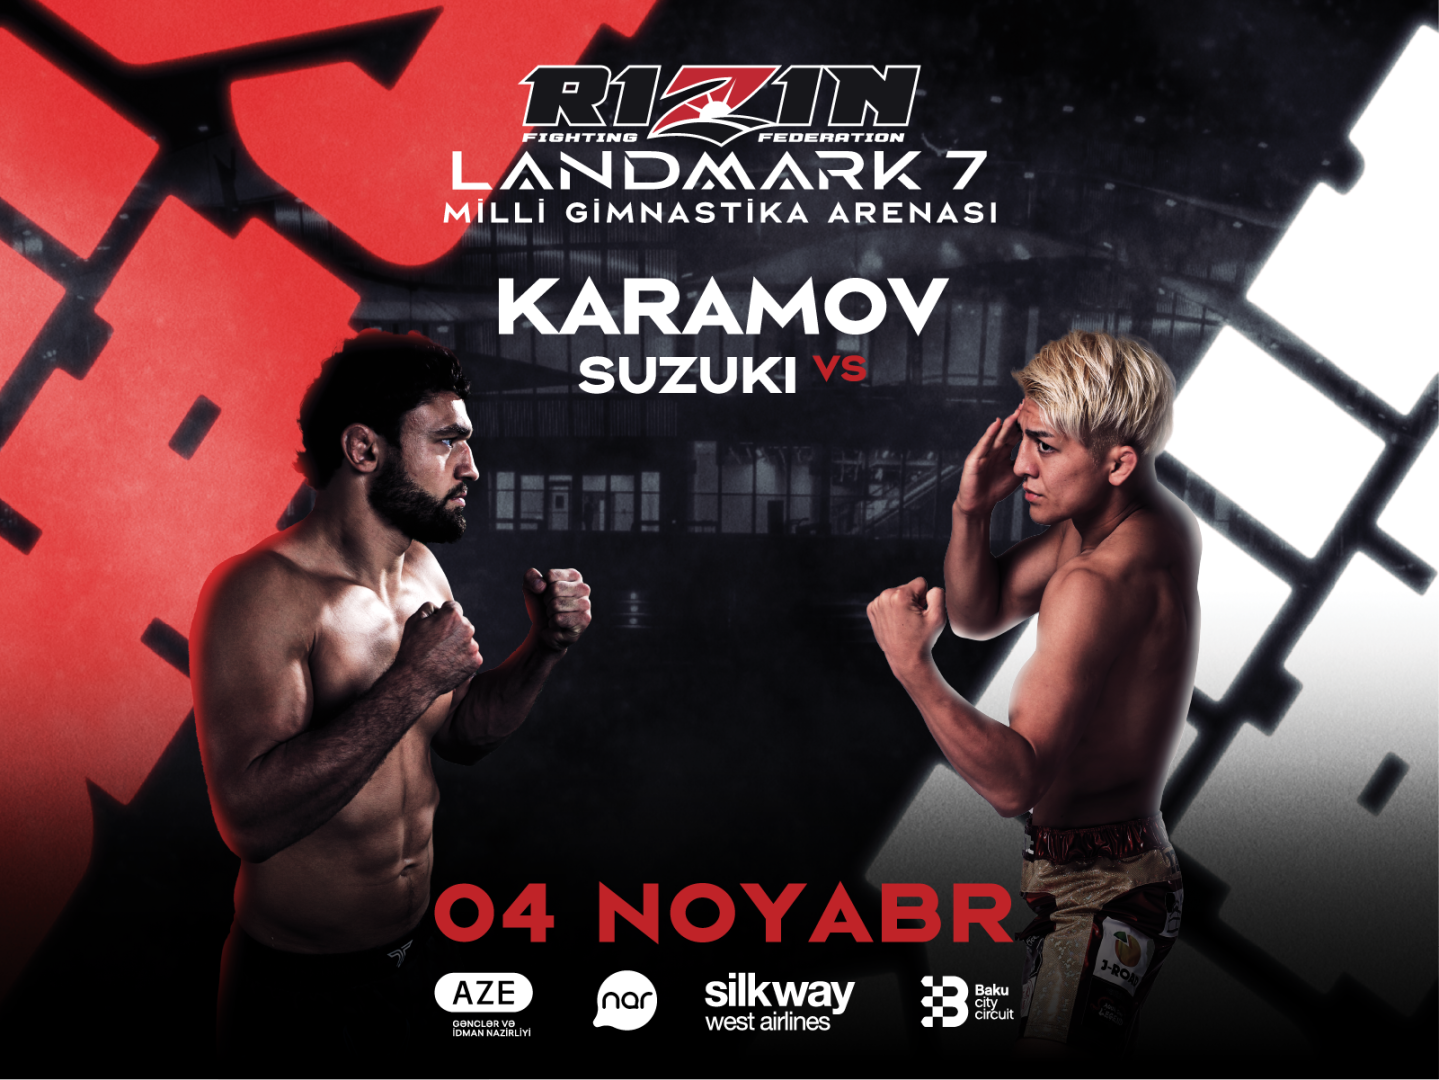 Nar becomes an official partner of the international MMA competition RIZIN